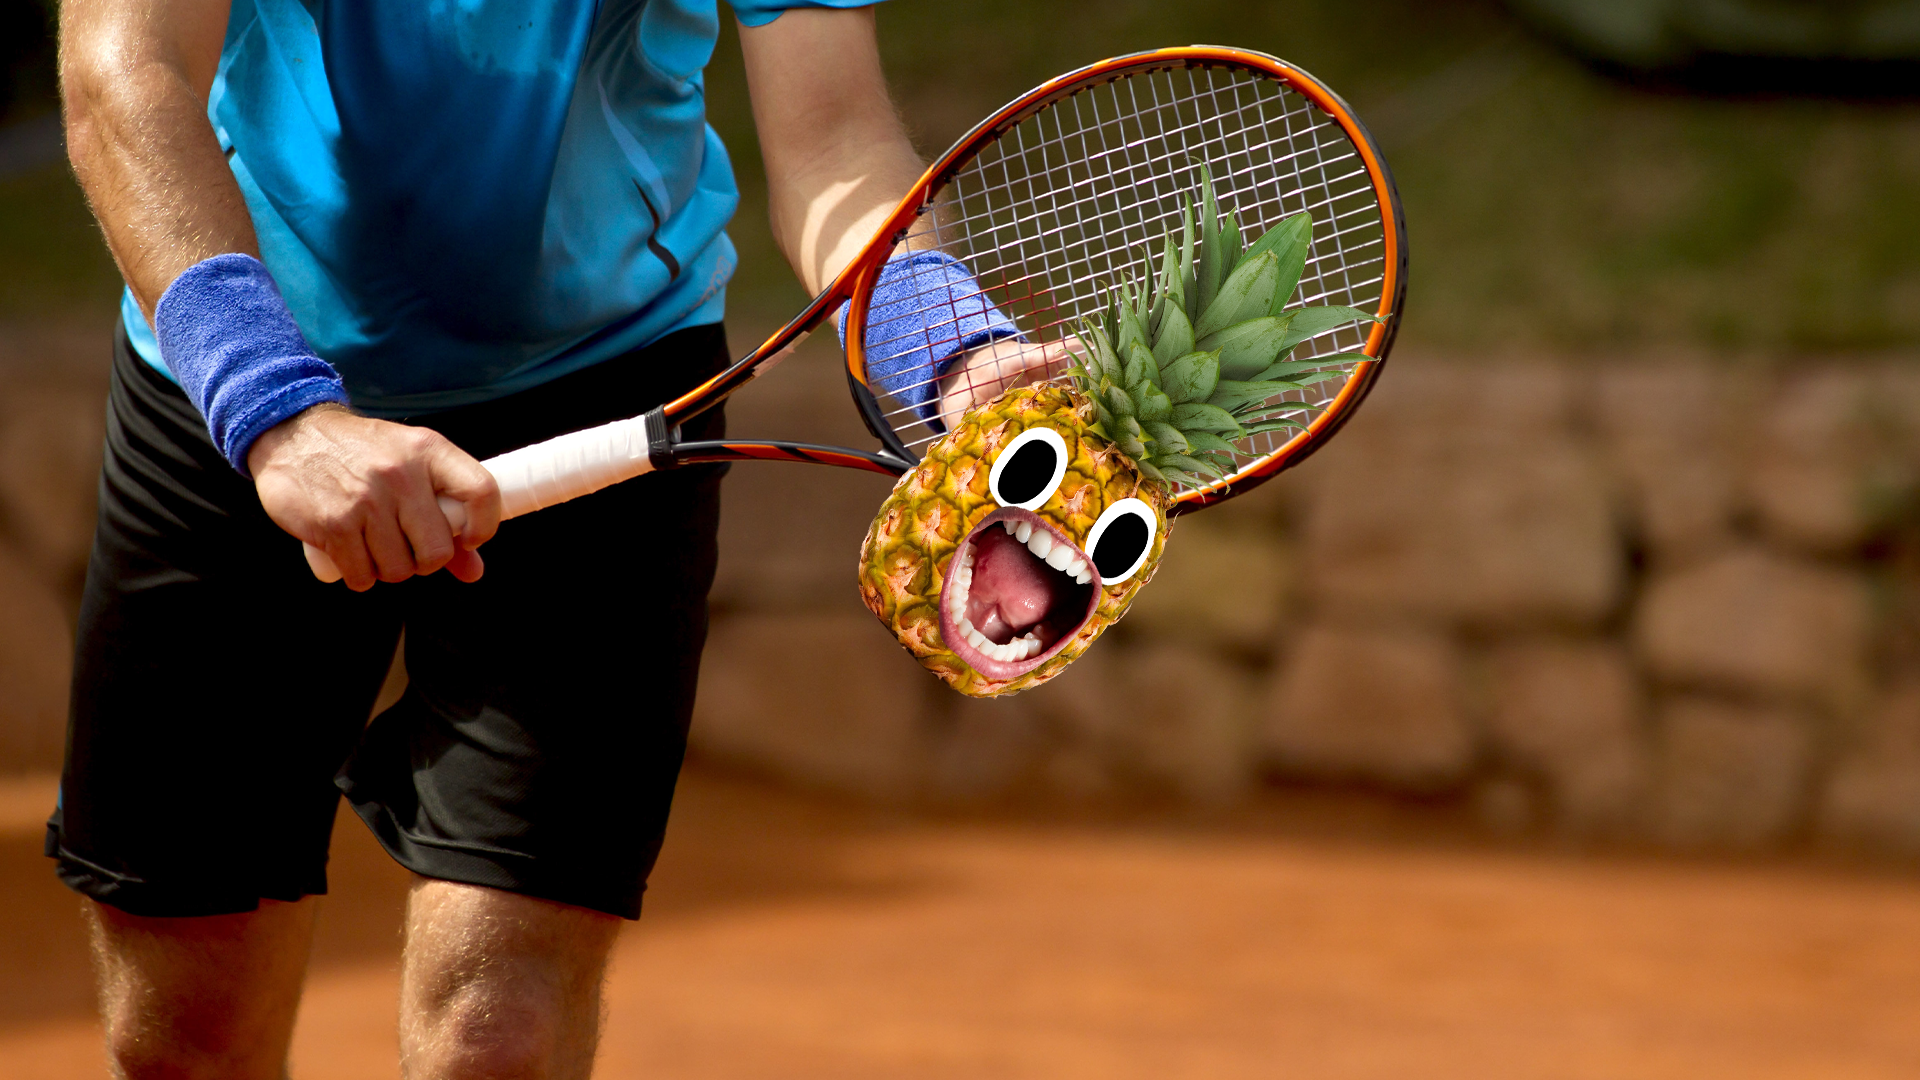 Man playing tennis with pineapple